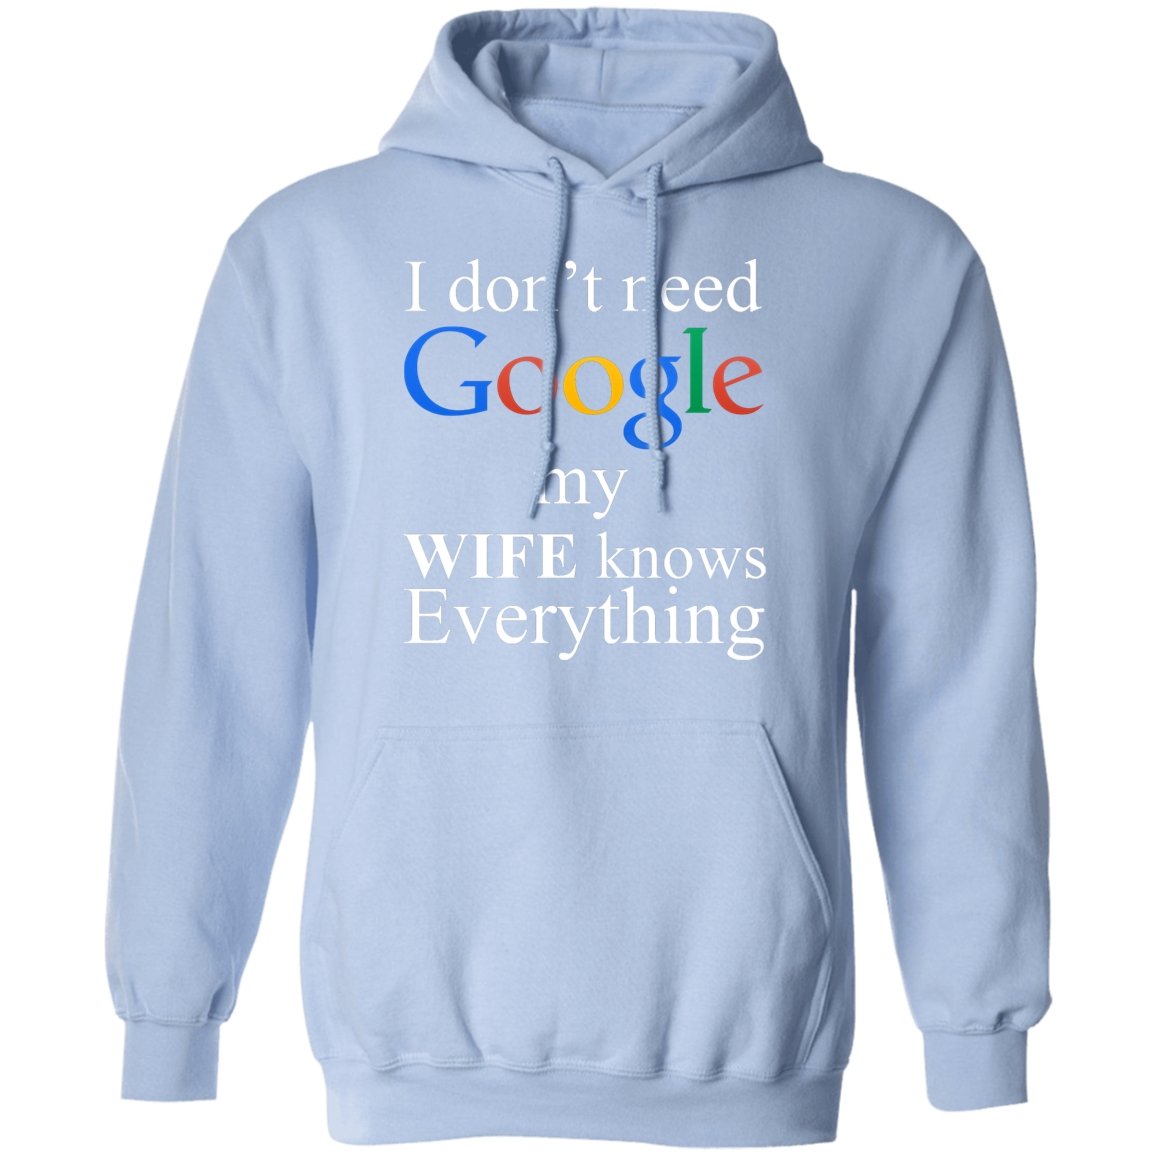 I Don't Need Google My Wife Knows Everything Apparel | Apparel | american apparel usa tshirt, American Greatness, american made, american shirt, american shirts, christmas gifts, gift for dad, gifts, gifts for christmas, gifts for men, google, google hoodie, google shirt, google sweatshirt, google tank top, made in usa, shirt, sweatshirt, sweatshirts, usa, usa apparel, usa made | TageUnlimited